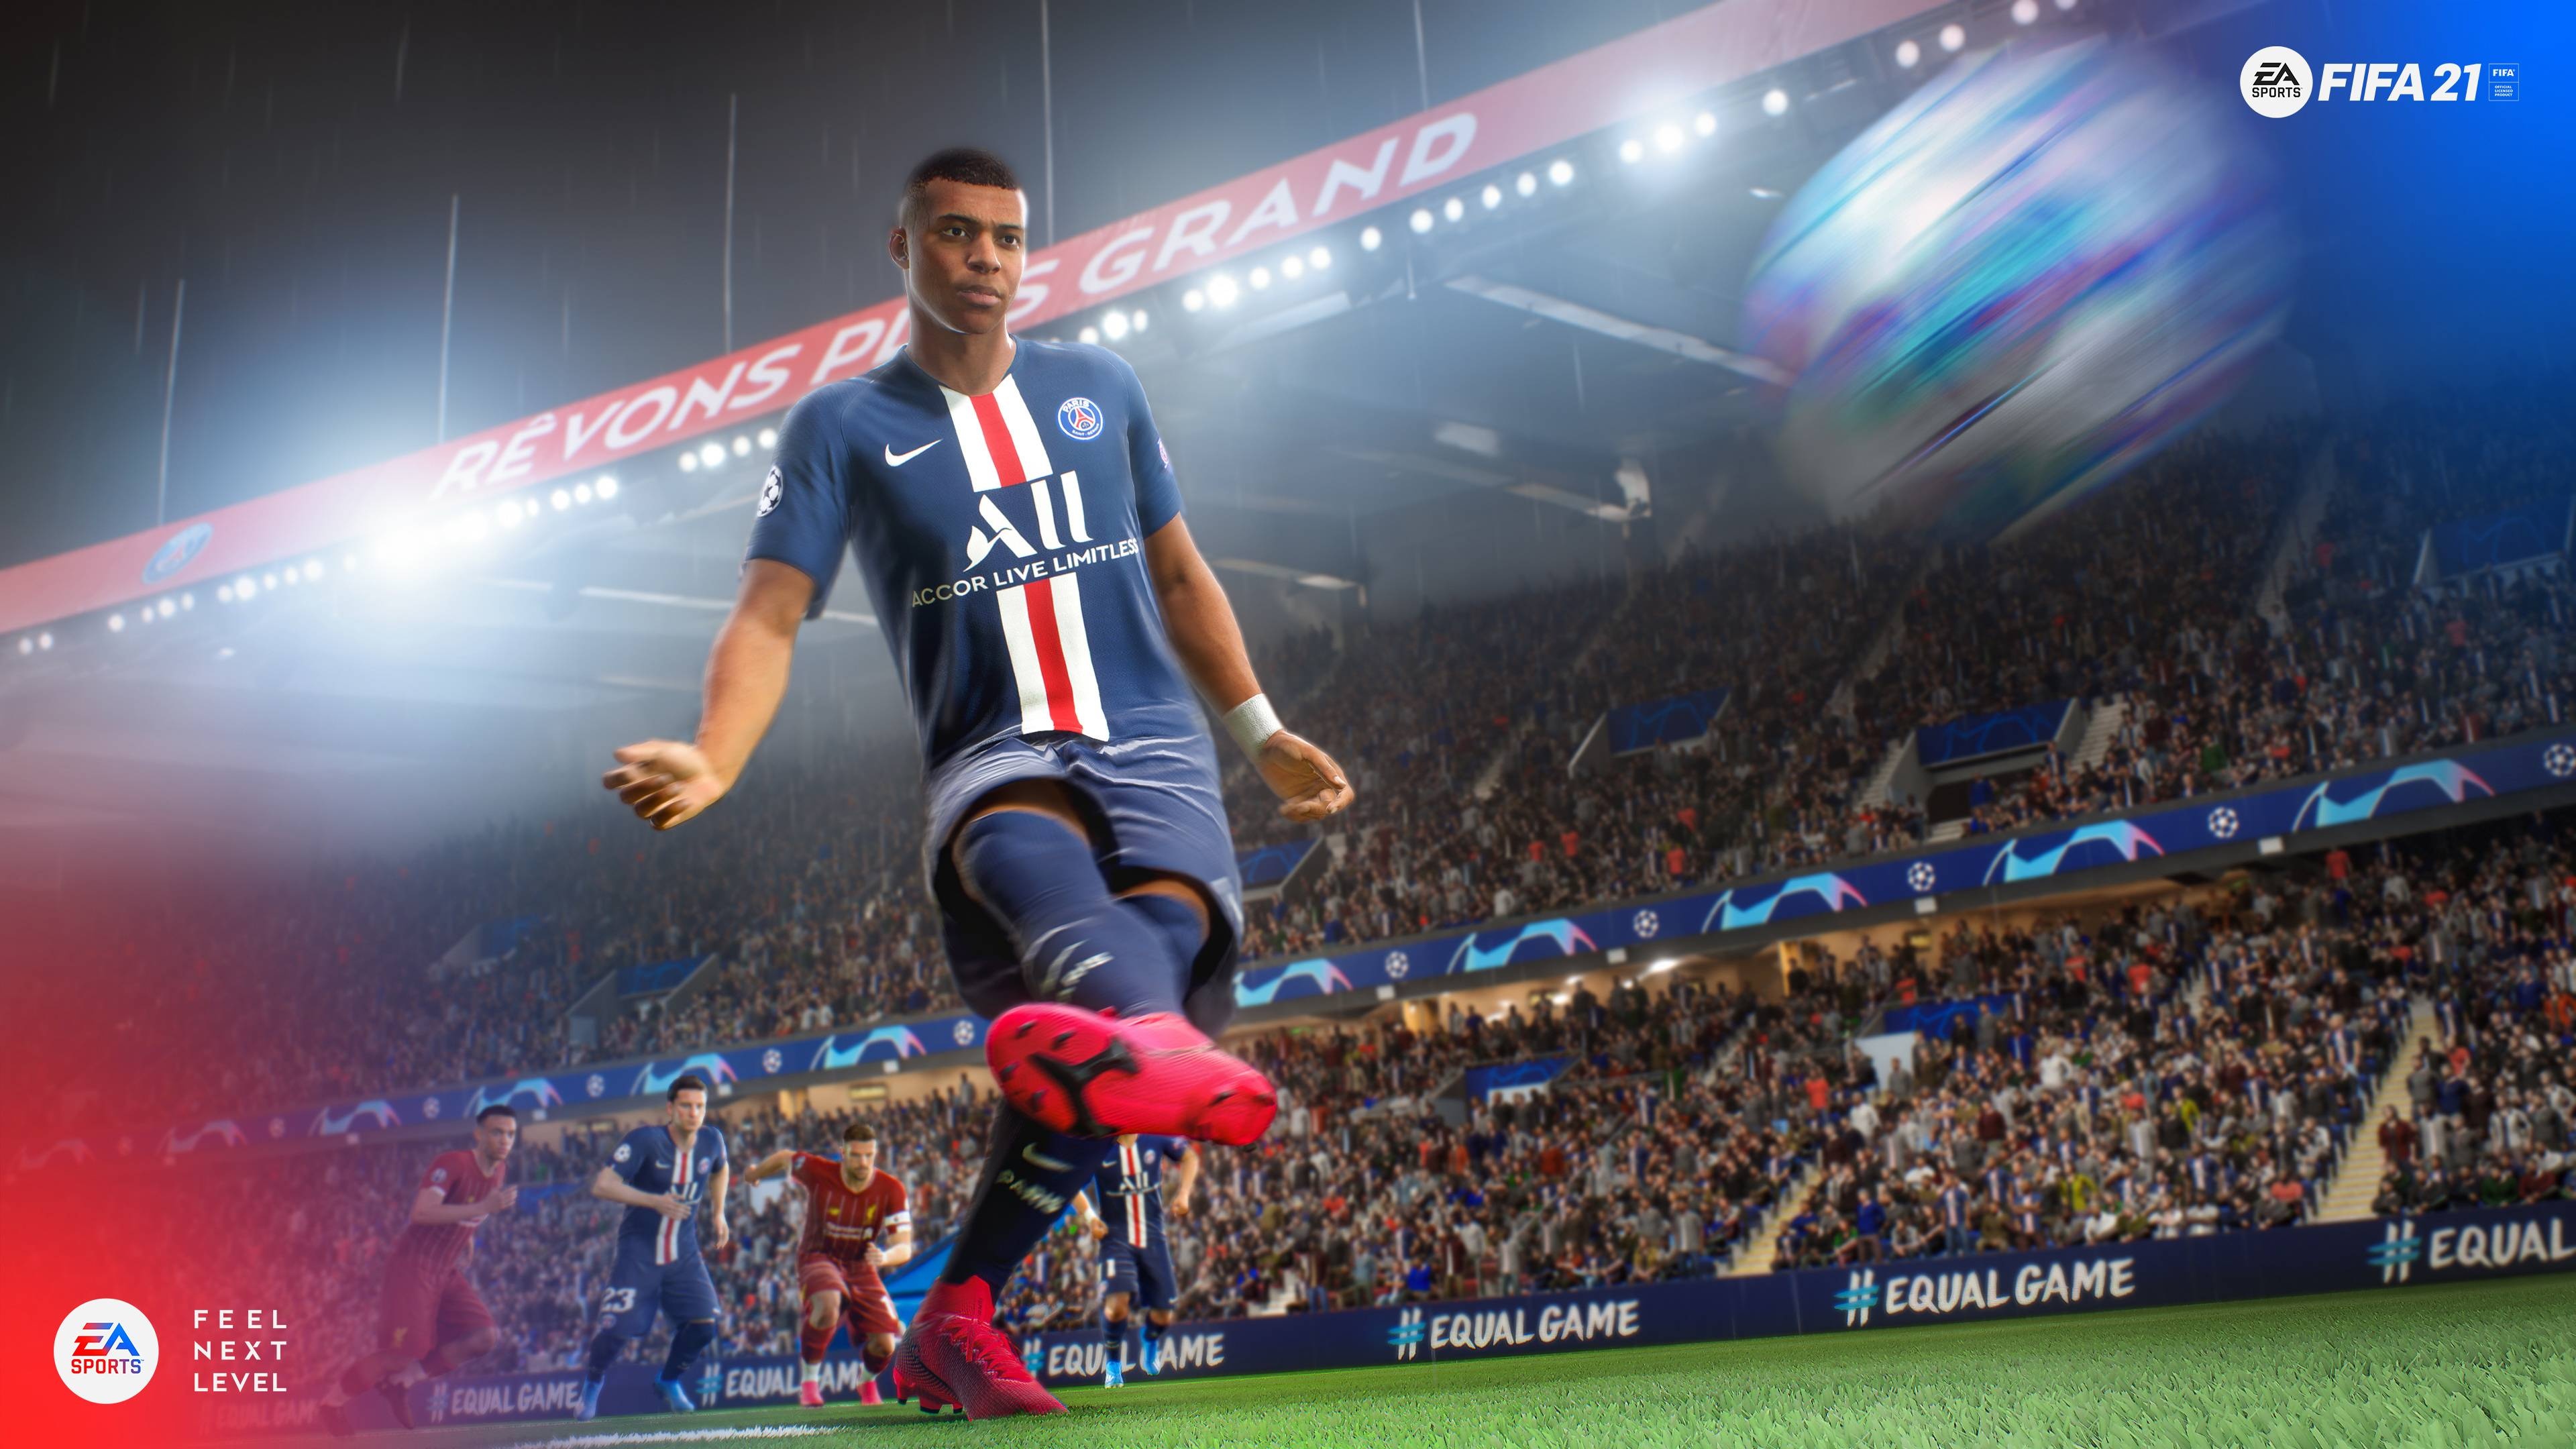 Sports game fever, FIFA wallpapers, Gaming excitement, Football frenzy, 3840x2160 4K Desktop